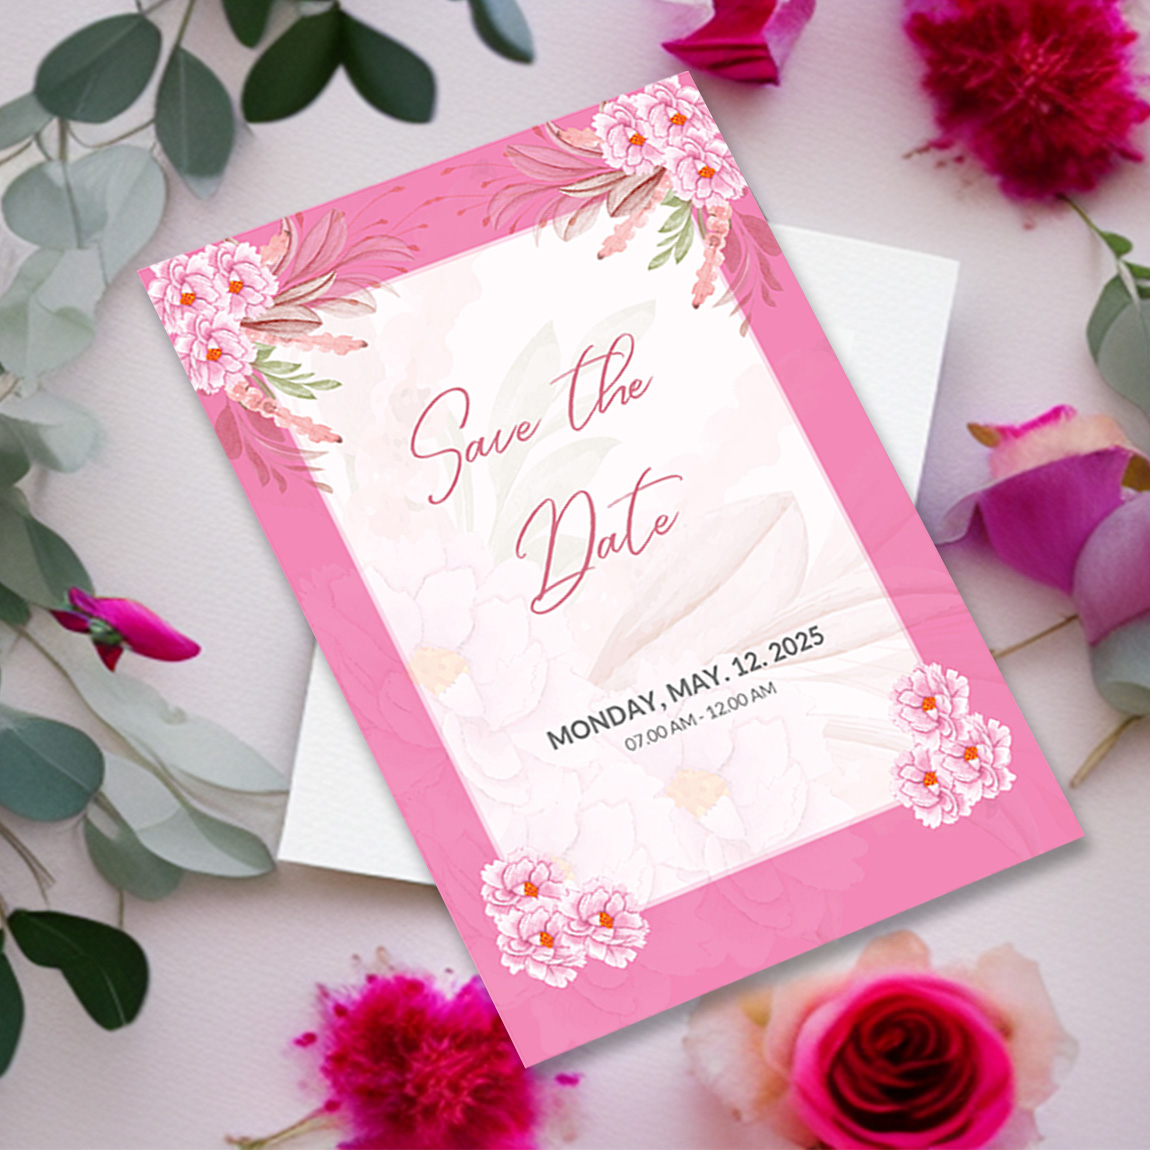 Image with elegant wedding invitation card with flowers.